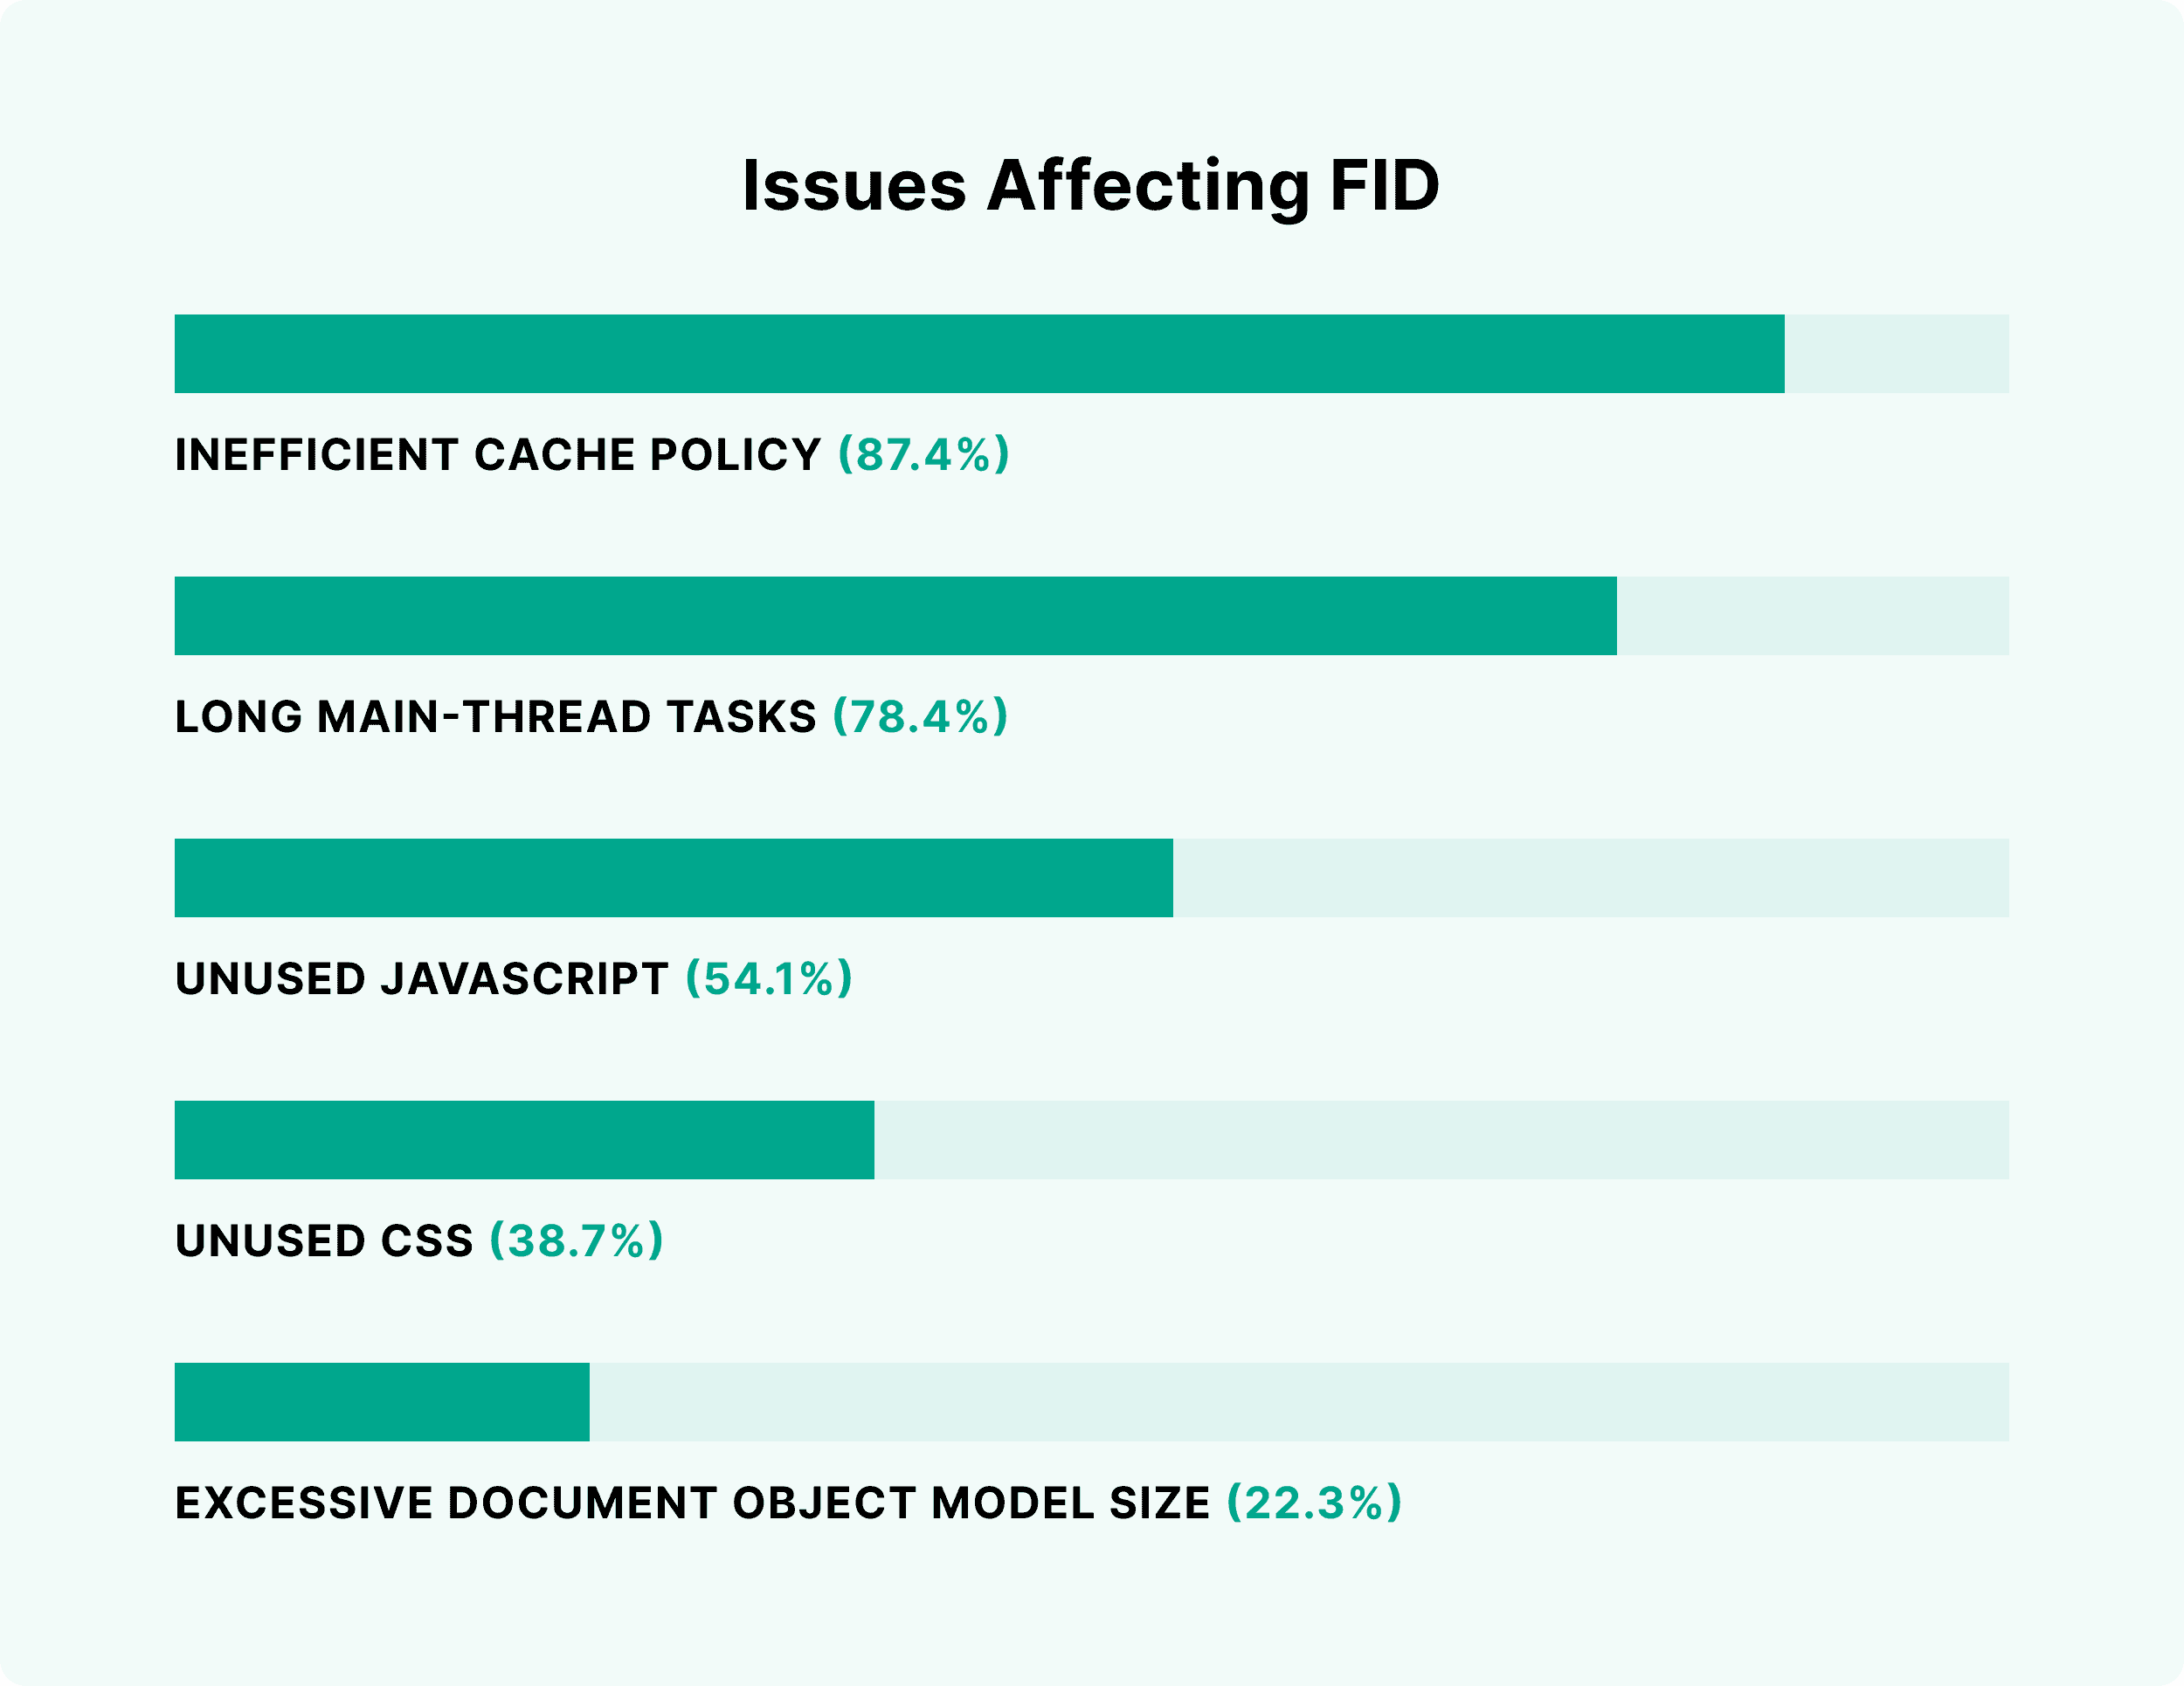 Issues affecting FID